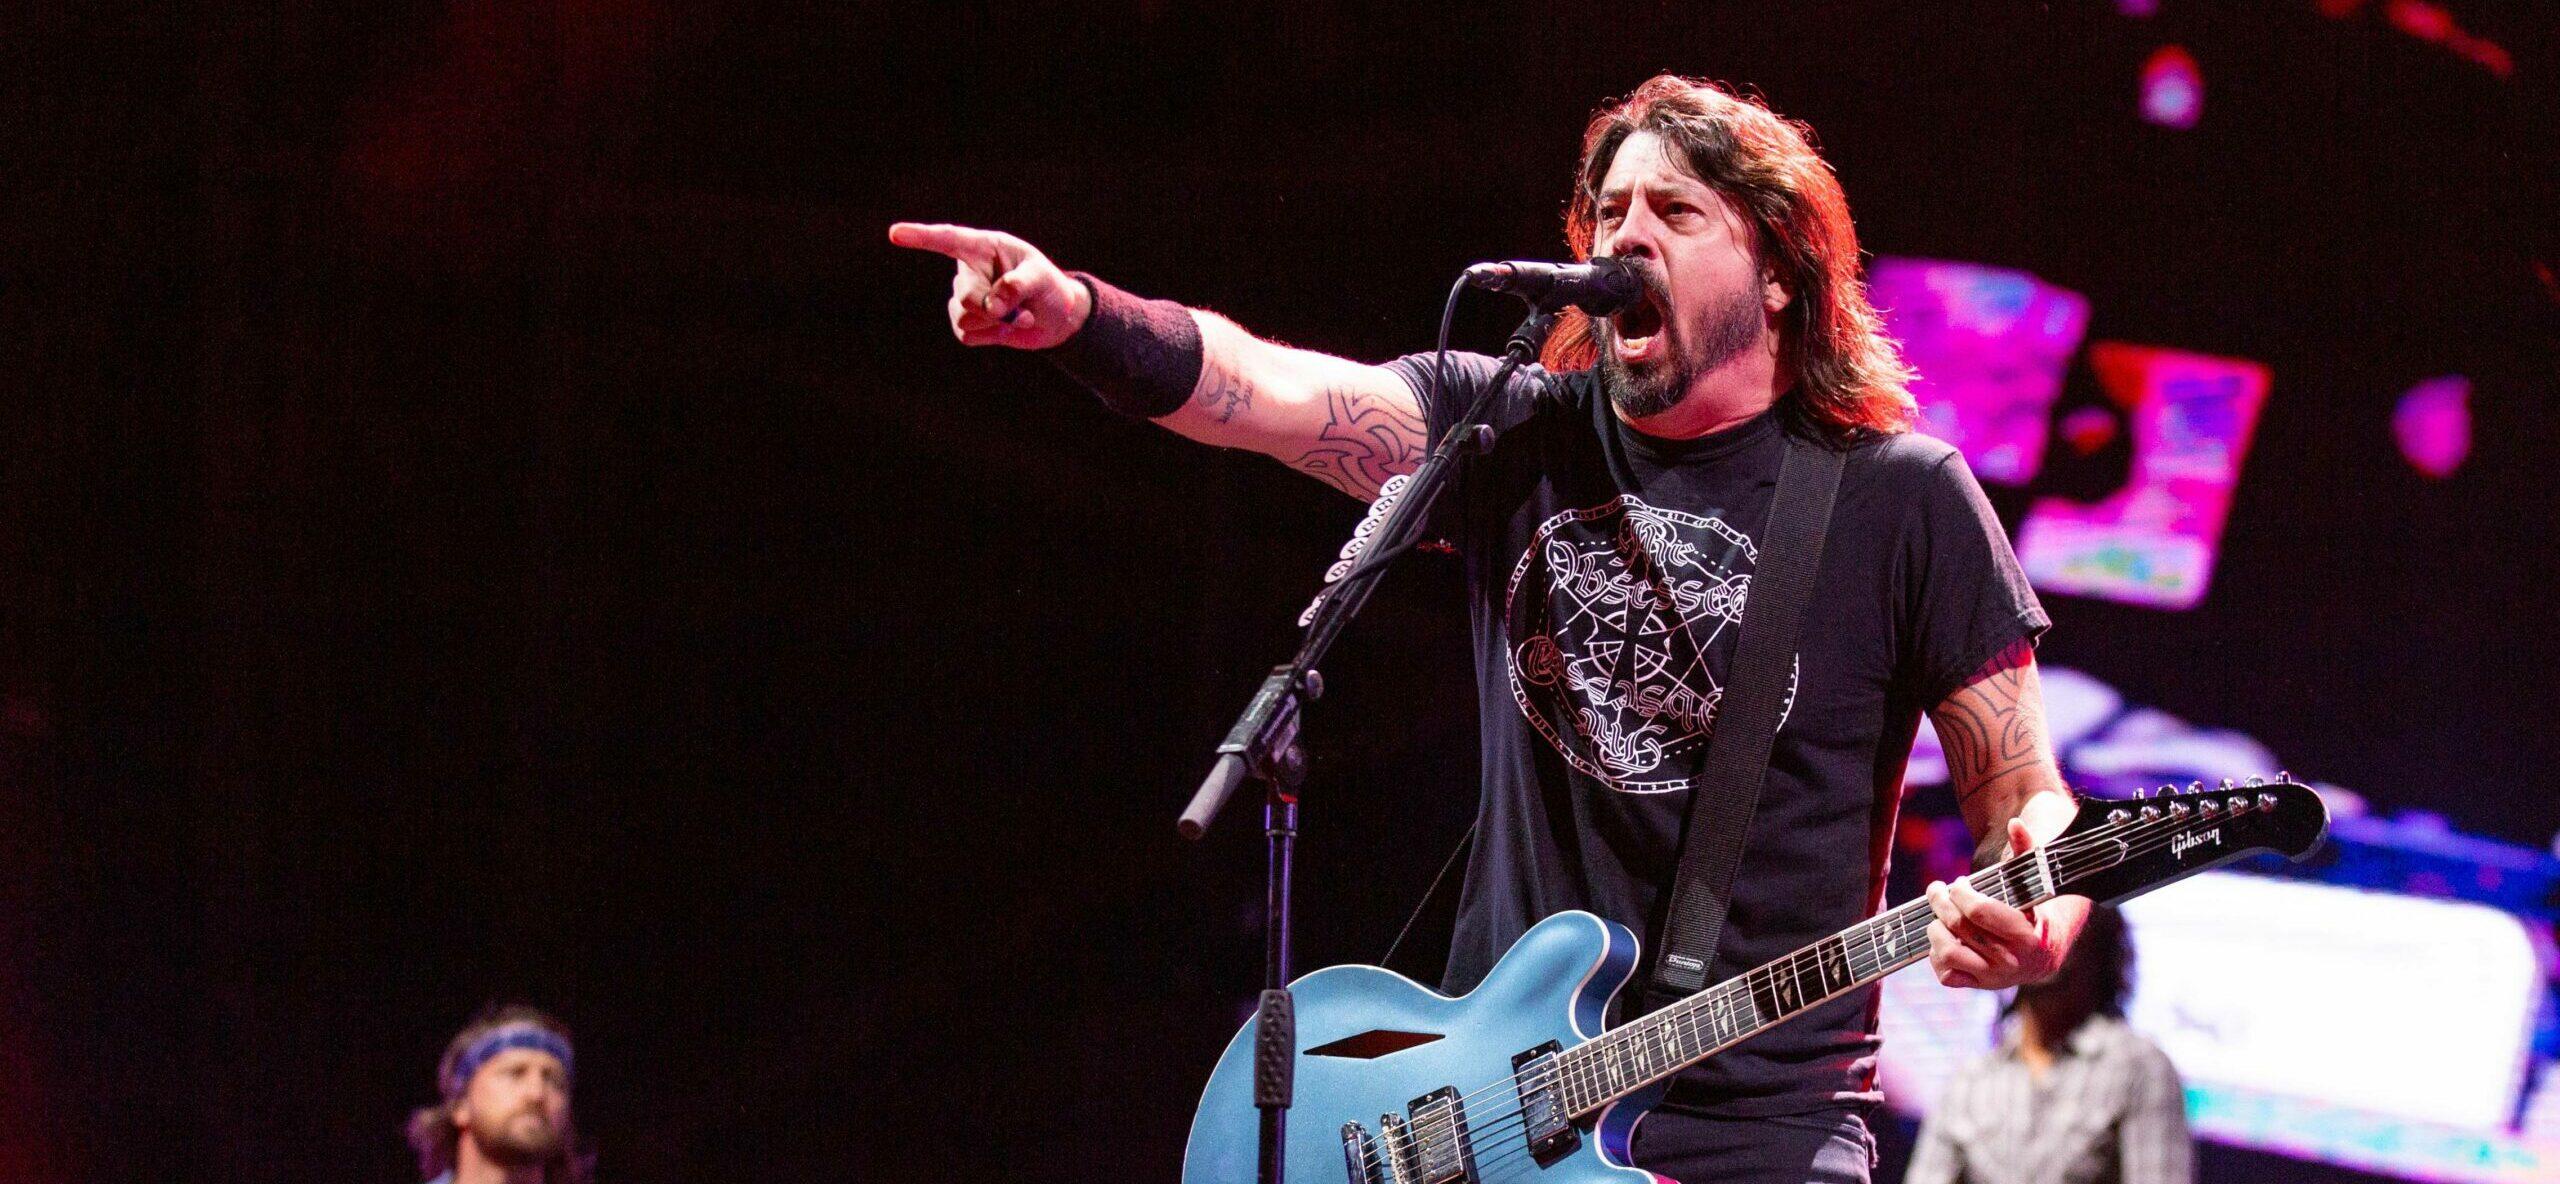 Dave Grohl at the Sonic Temple Music Festival 2019